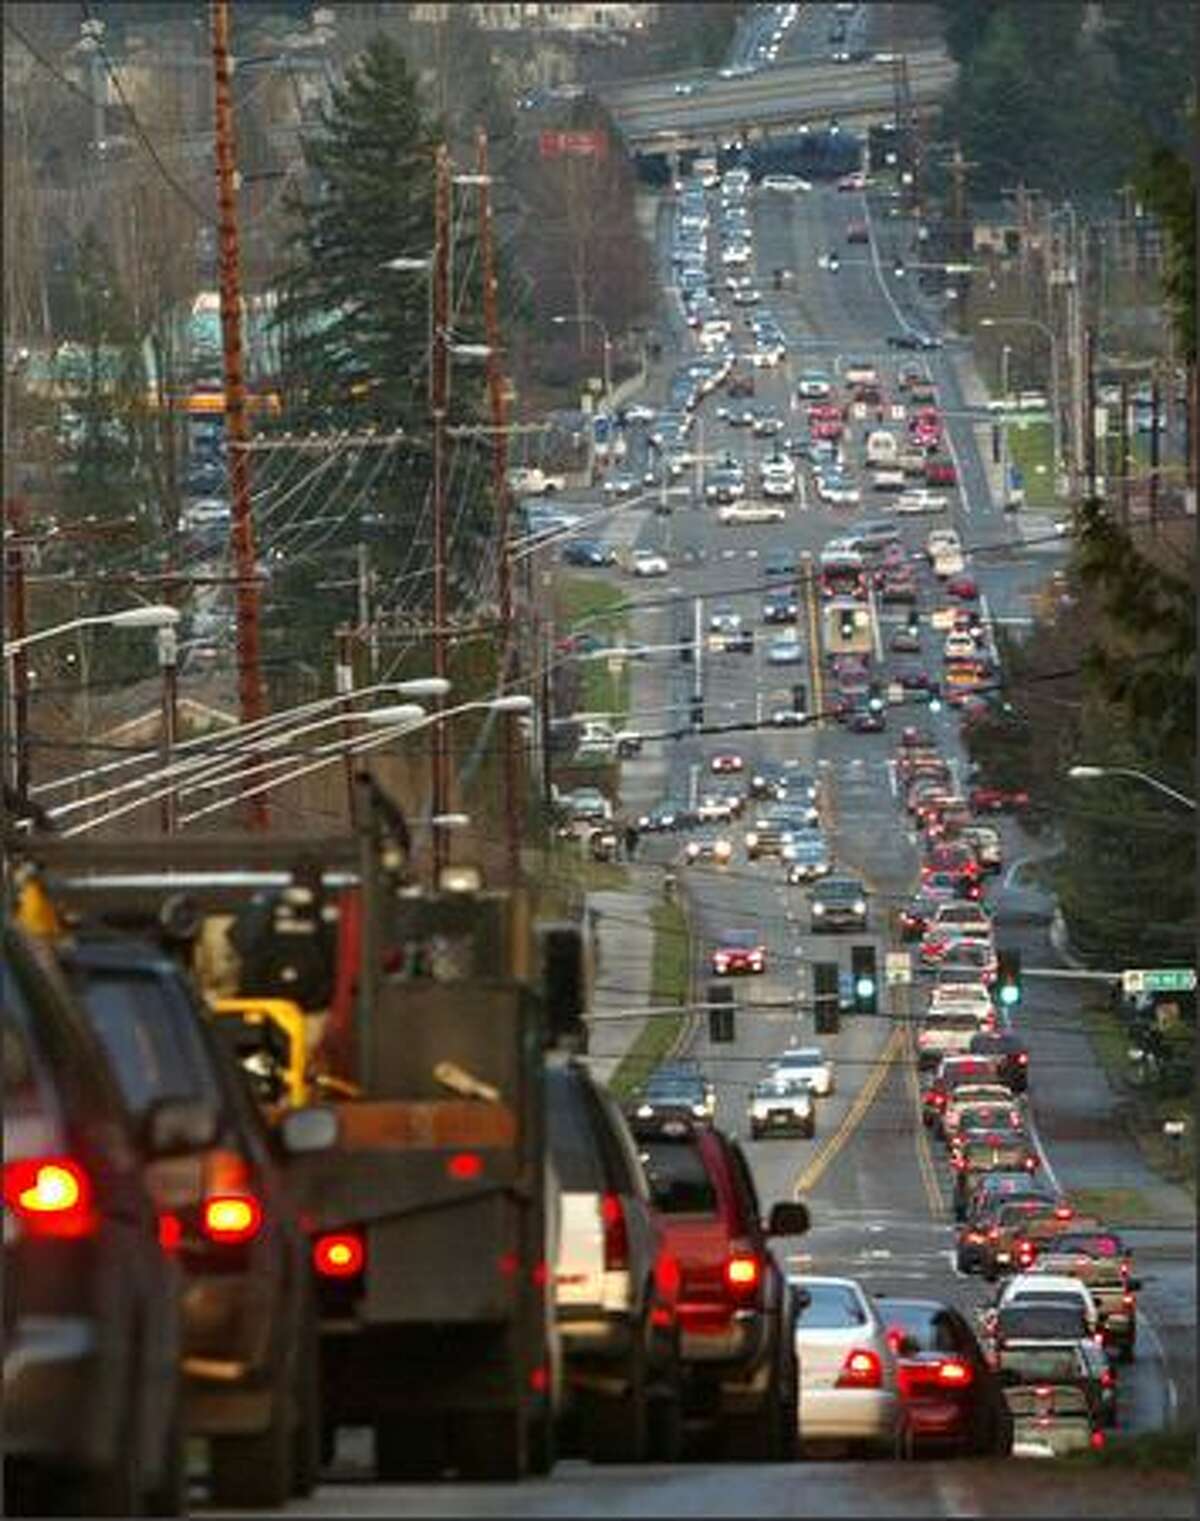 Traffic back up on roads in South Snohomish County Friday after winds downed trees and power lines throughout much of the area. Drivers trying to get around major backups clogged even minor streets and backgrounds. Seattle Post-Intelligencer / Grant M. Haller